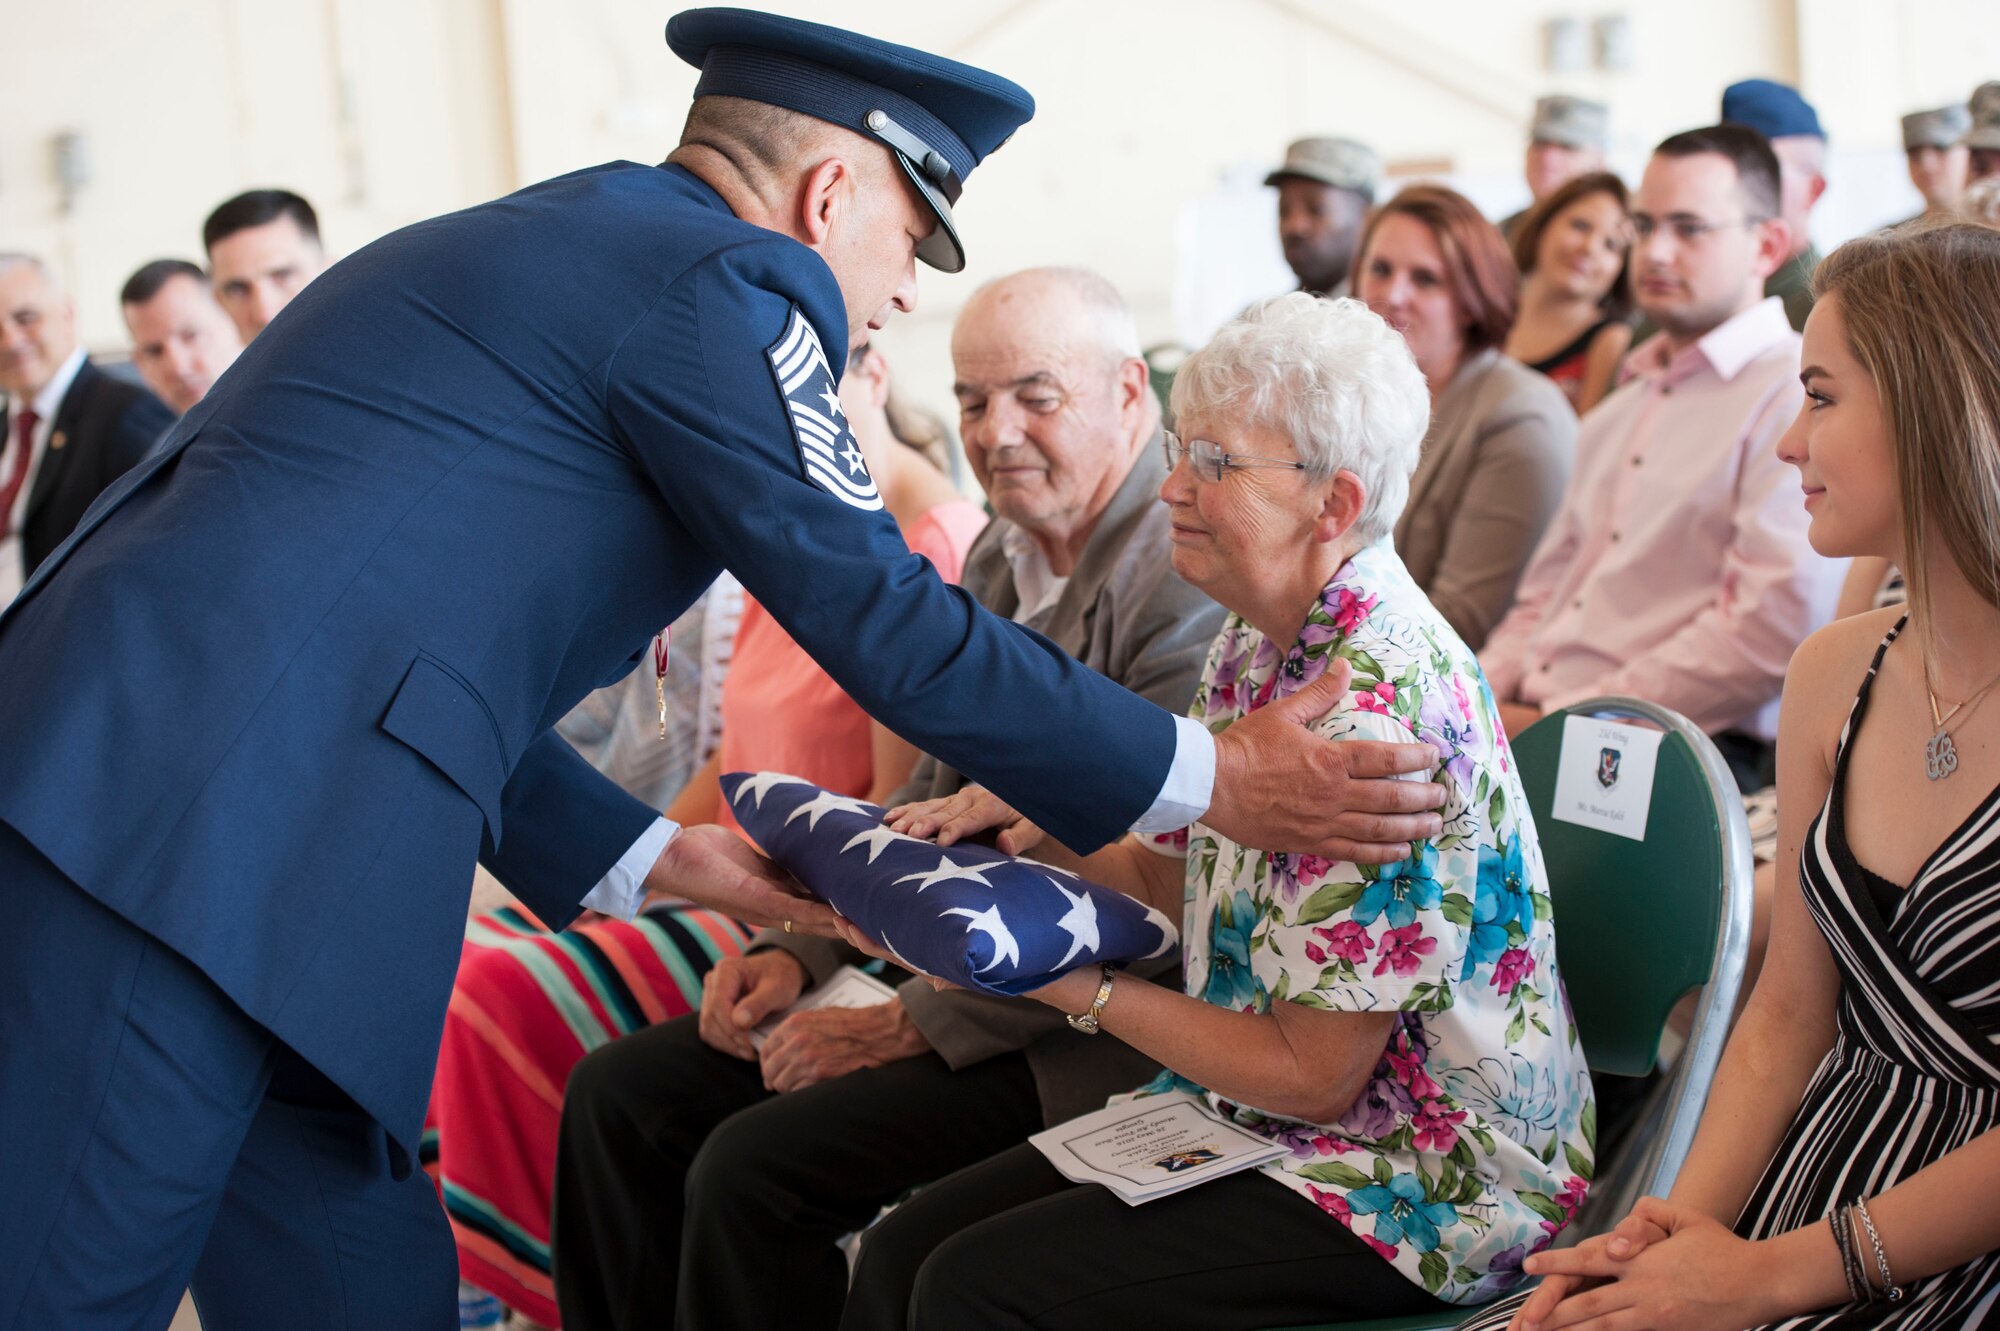 U.S. Air Force Chief Master Sgt. David Kelch, 23d Wing command chief, presents his retirement flag to his mother during his retirement ceremony at Moody Air Force Base, Ga., May 26, 2016. As the command chief, Kelch served as the liaison between the wing commander and the 23d WG's more than 6,000 military and civilian personnel. (U.S. Air Force photo by Andrea Jenkins/Released)